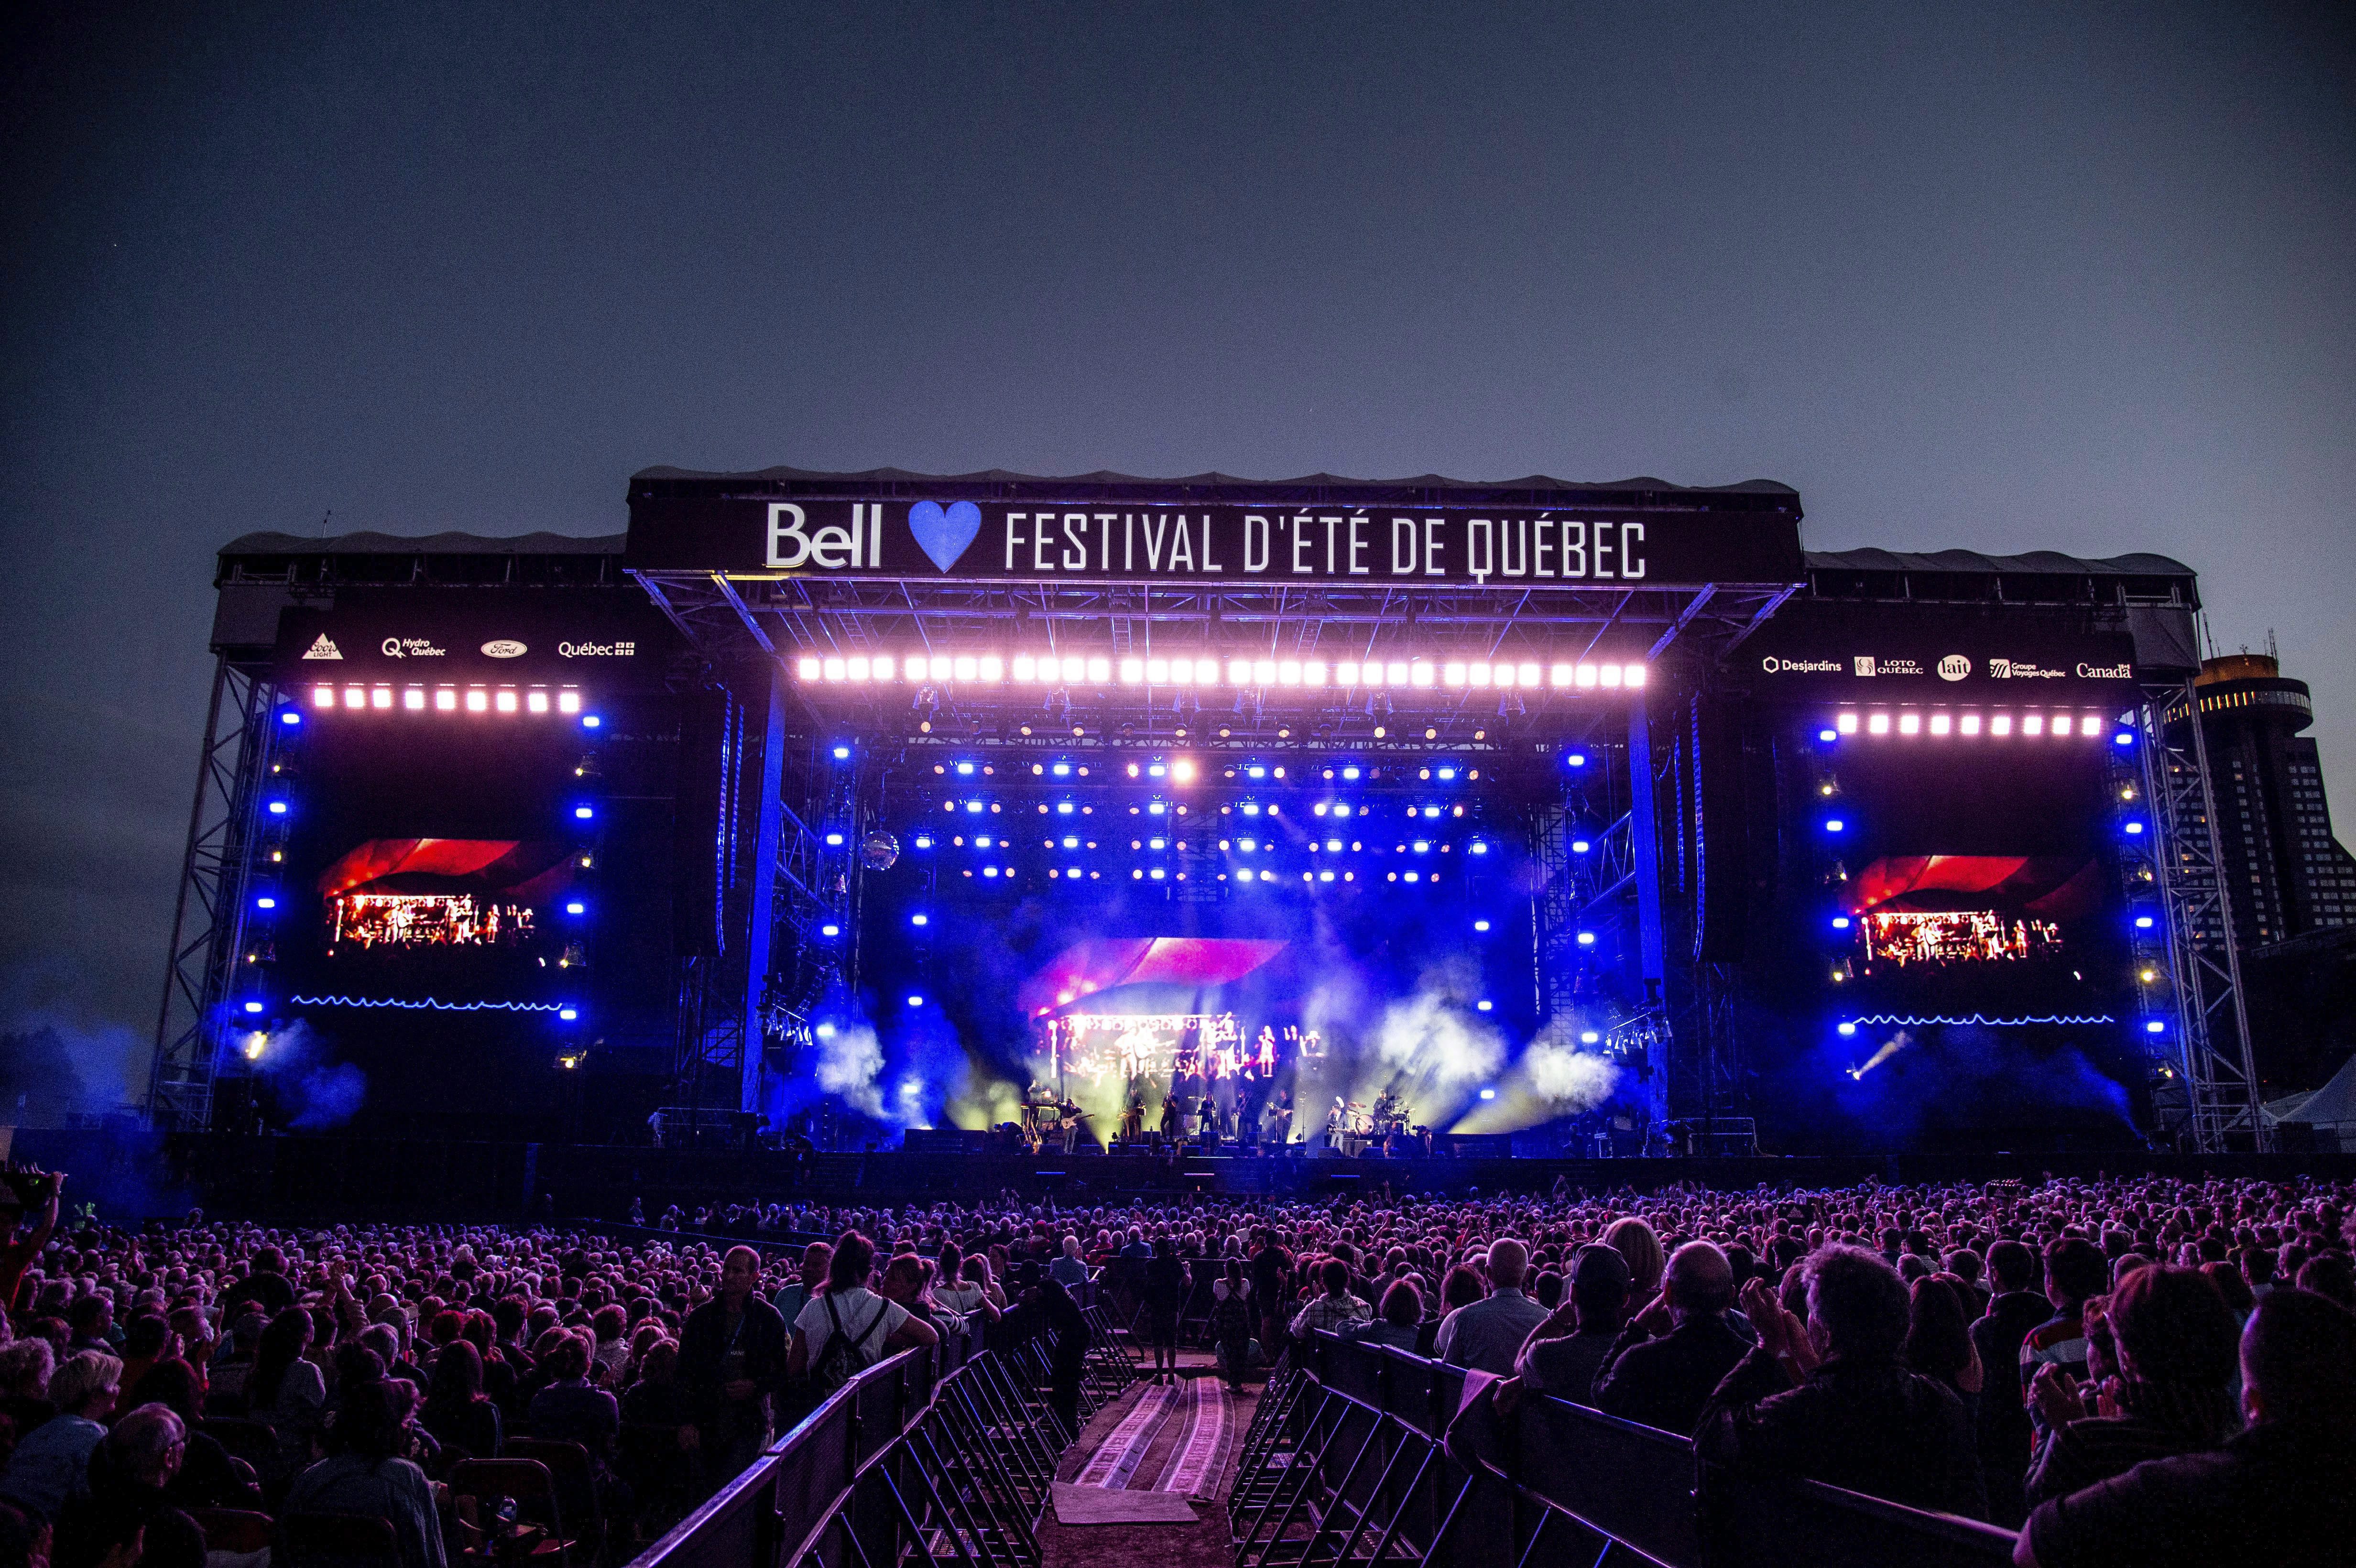 Festival-goers attend the Festival d'ete de Quebec on in Quebec City on July 10, 2018. THE CANADIAN PRESS/AP, Invision - Amy Harris